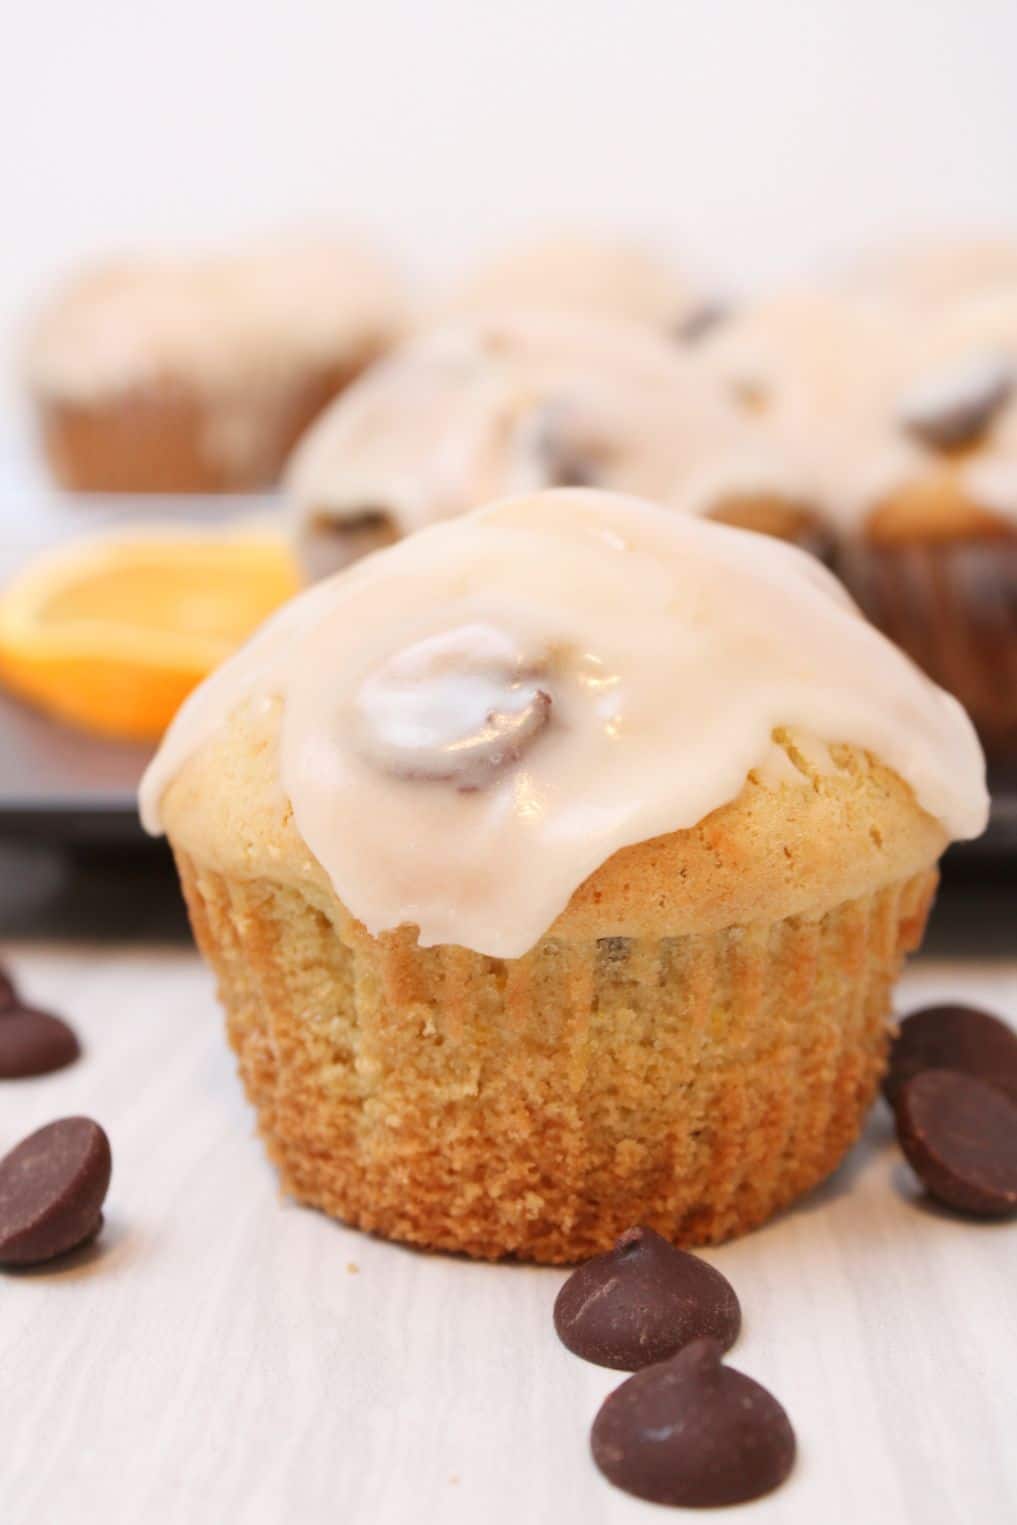 Up close shot of a dark chocolate chip and orange muffin with a glaze on top